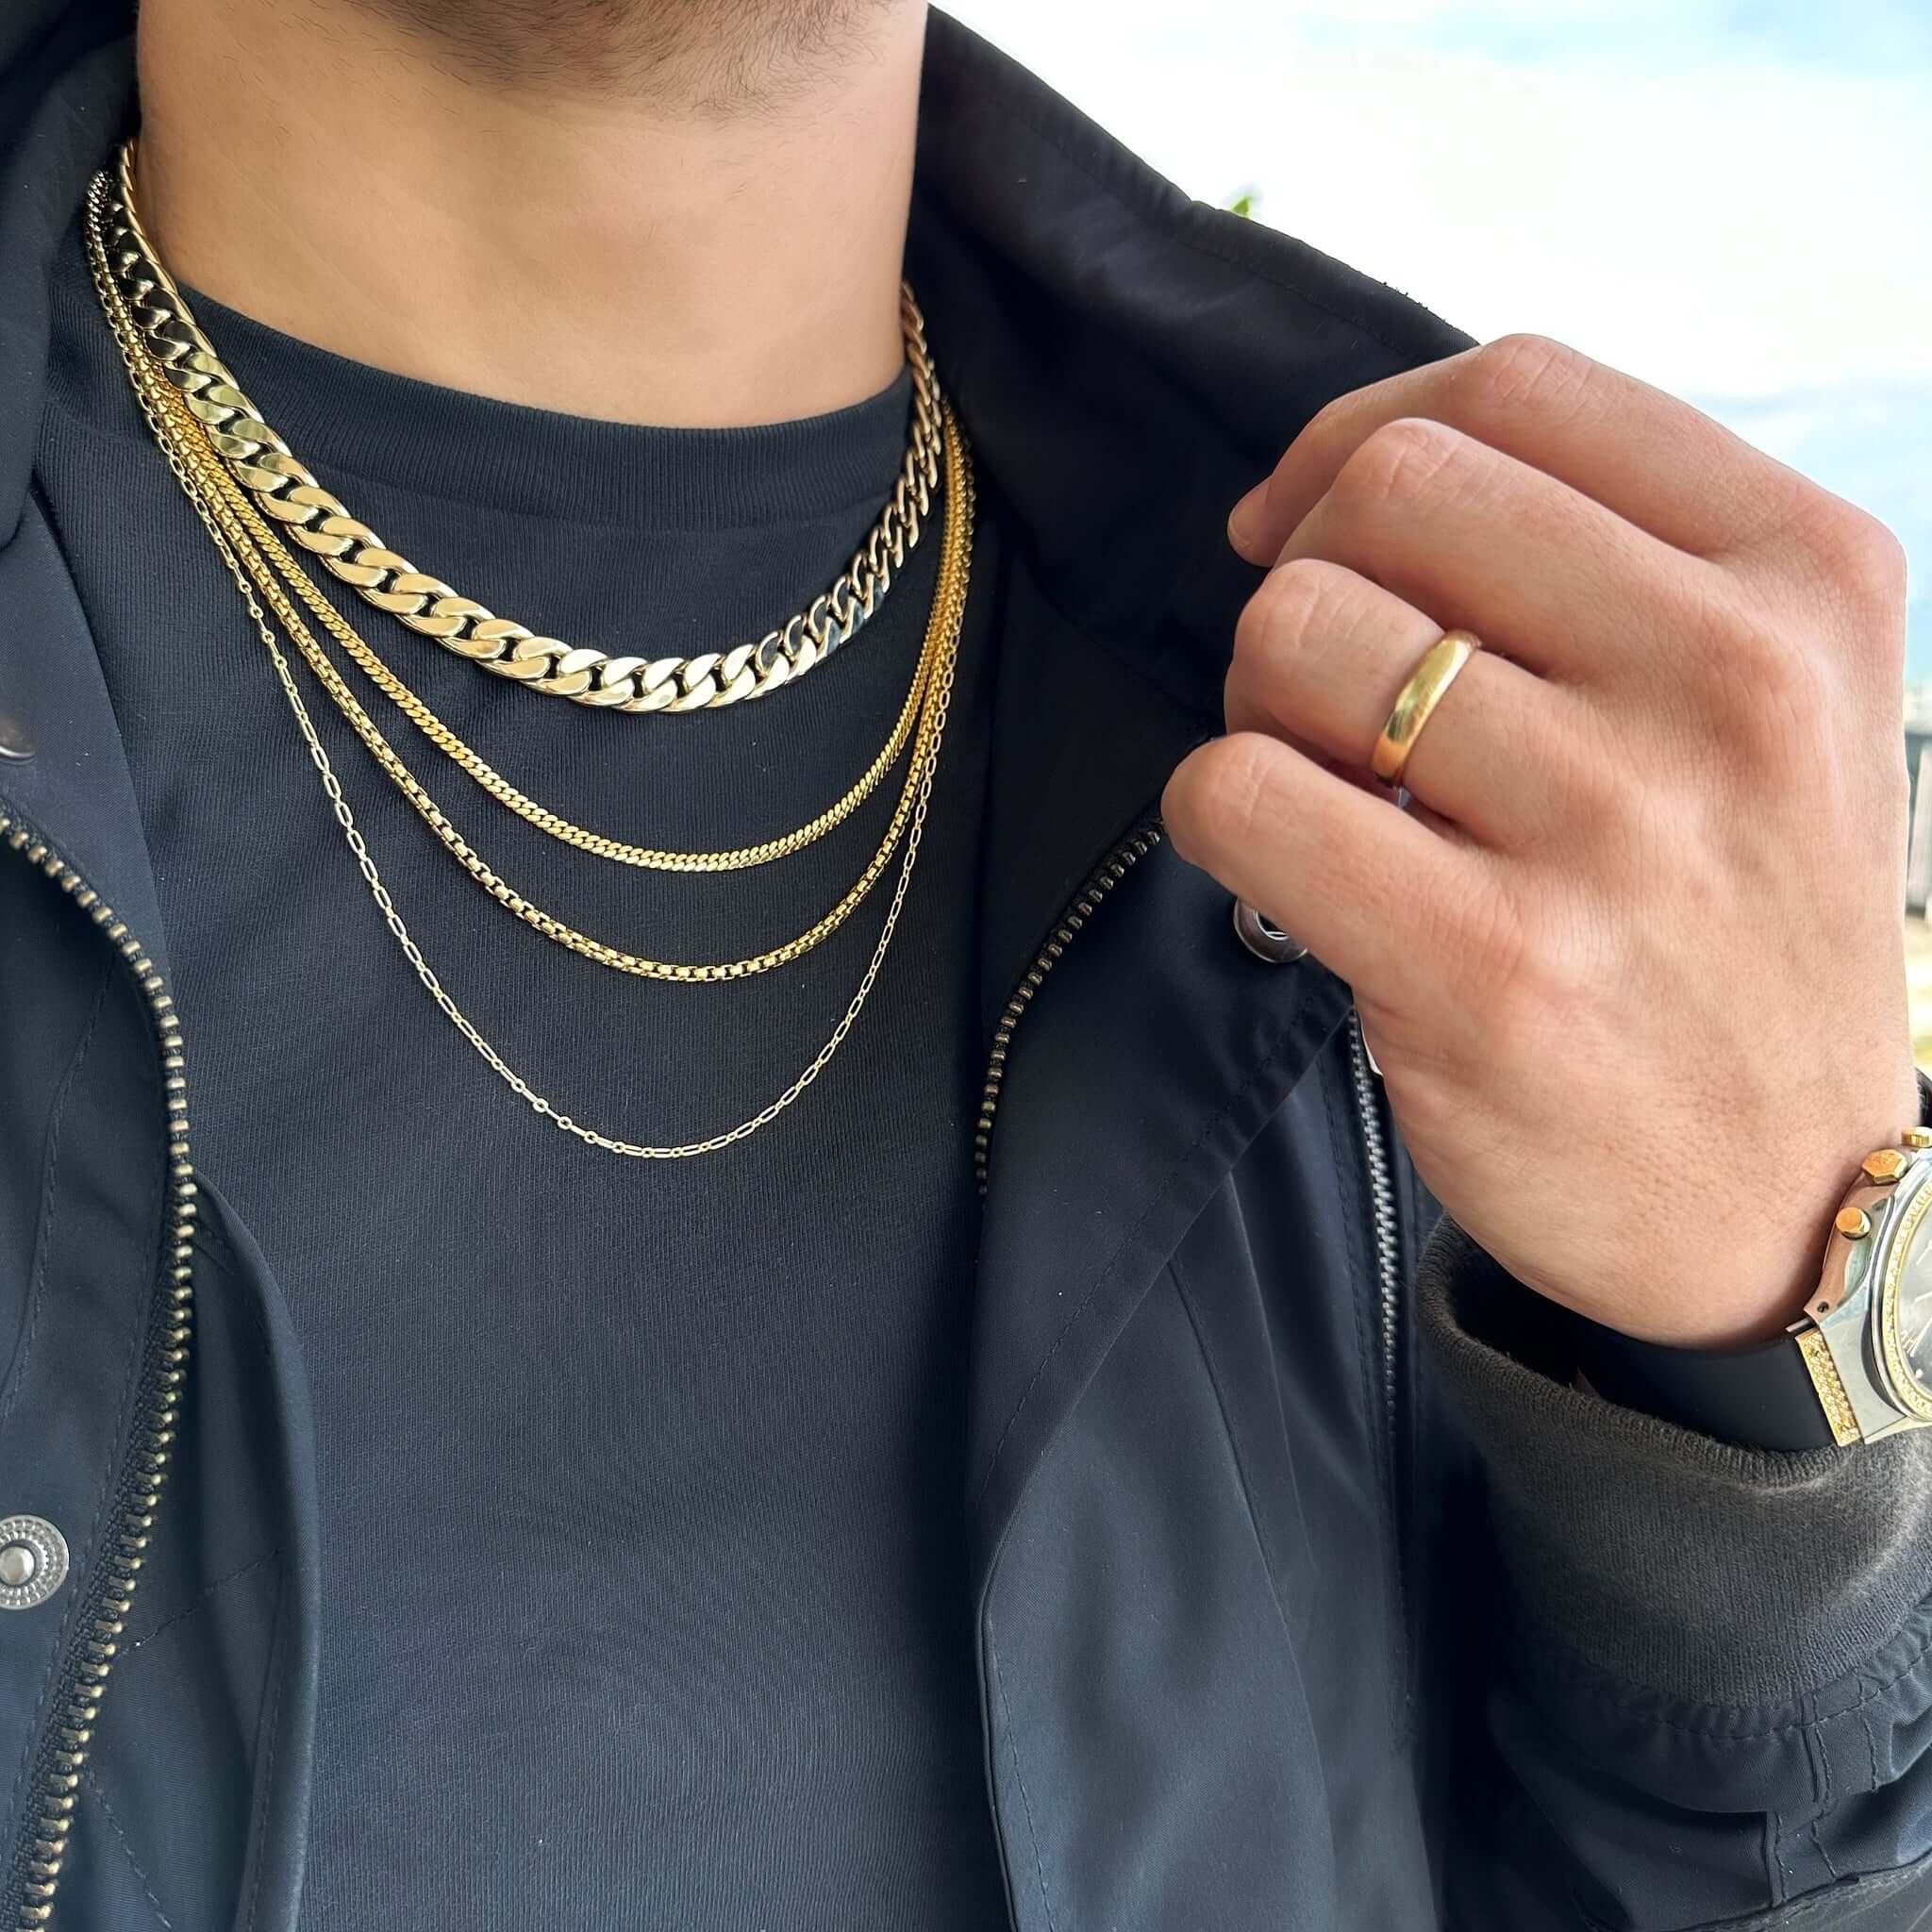 Men Real 10k Yellow Gold Thick Rope Chain Necklace 22 inch 10mm Diamond cut  Sale | eBay